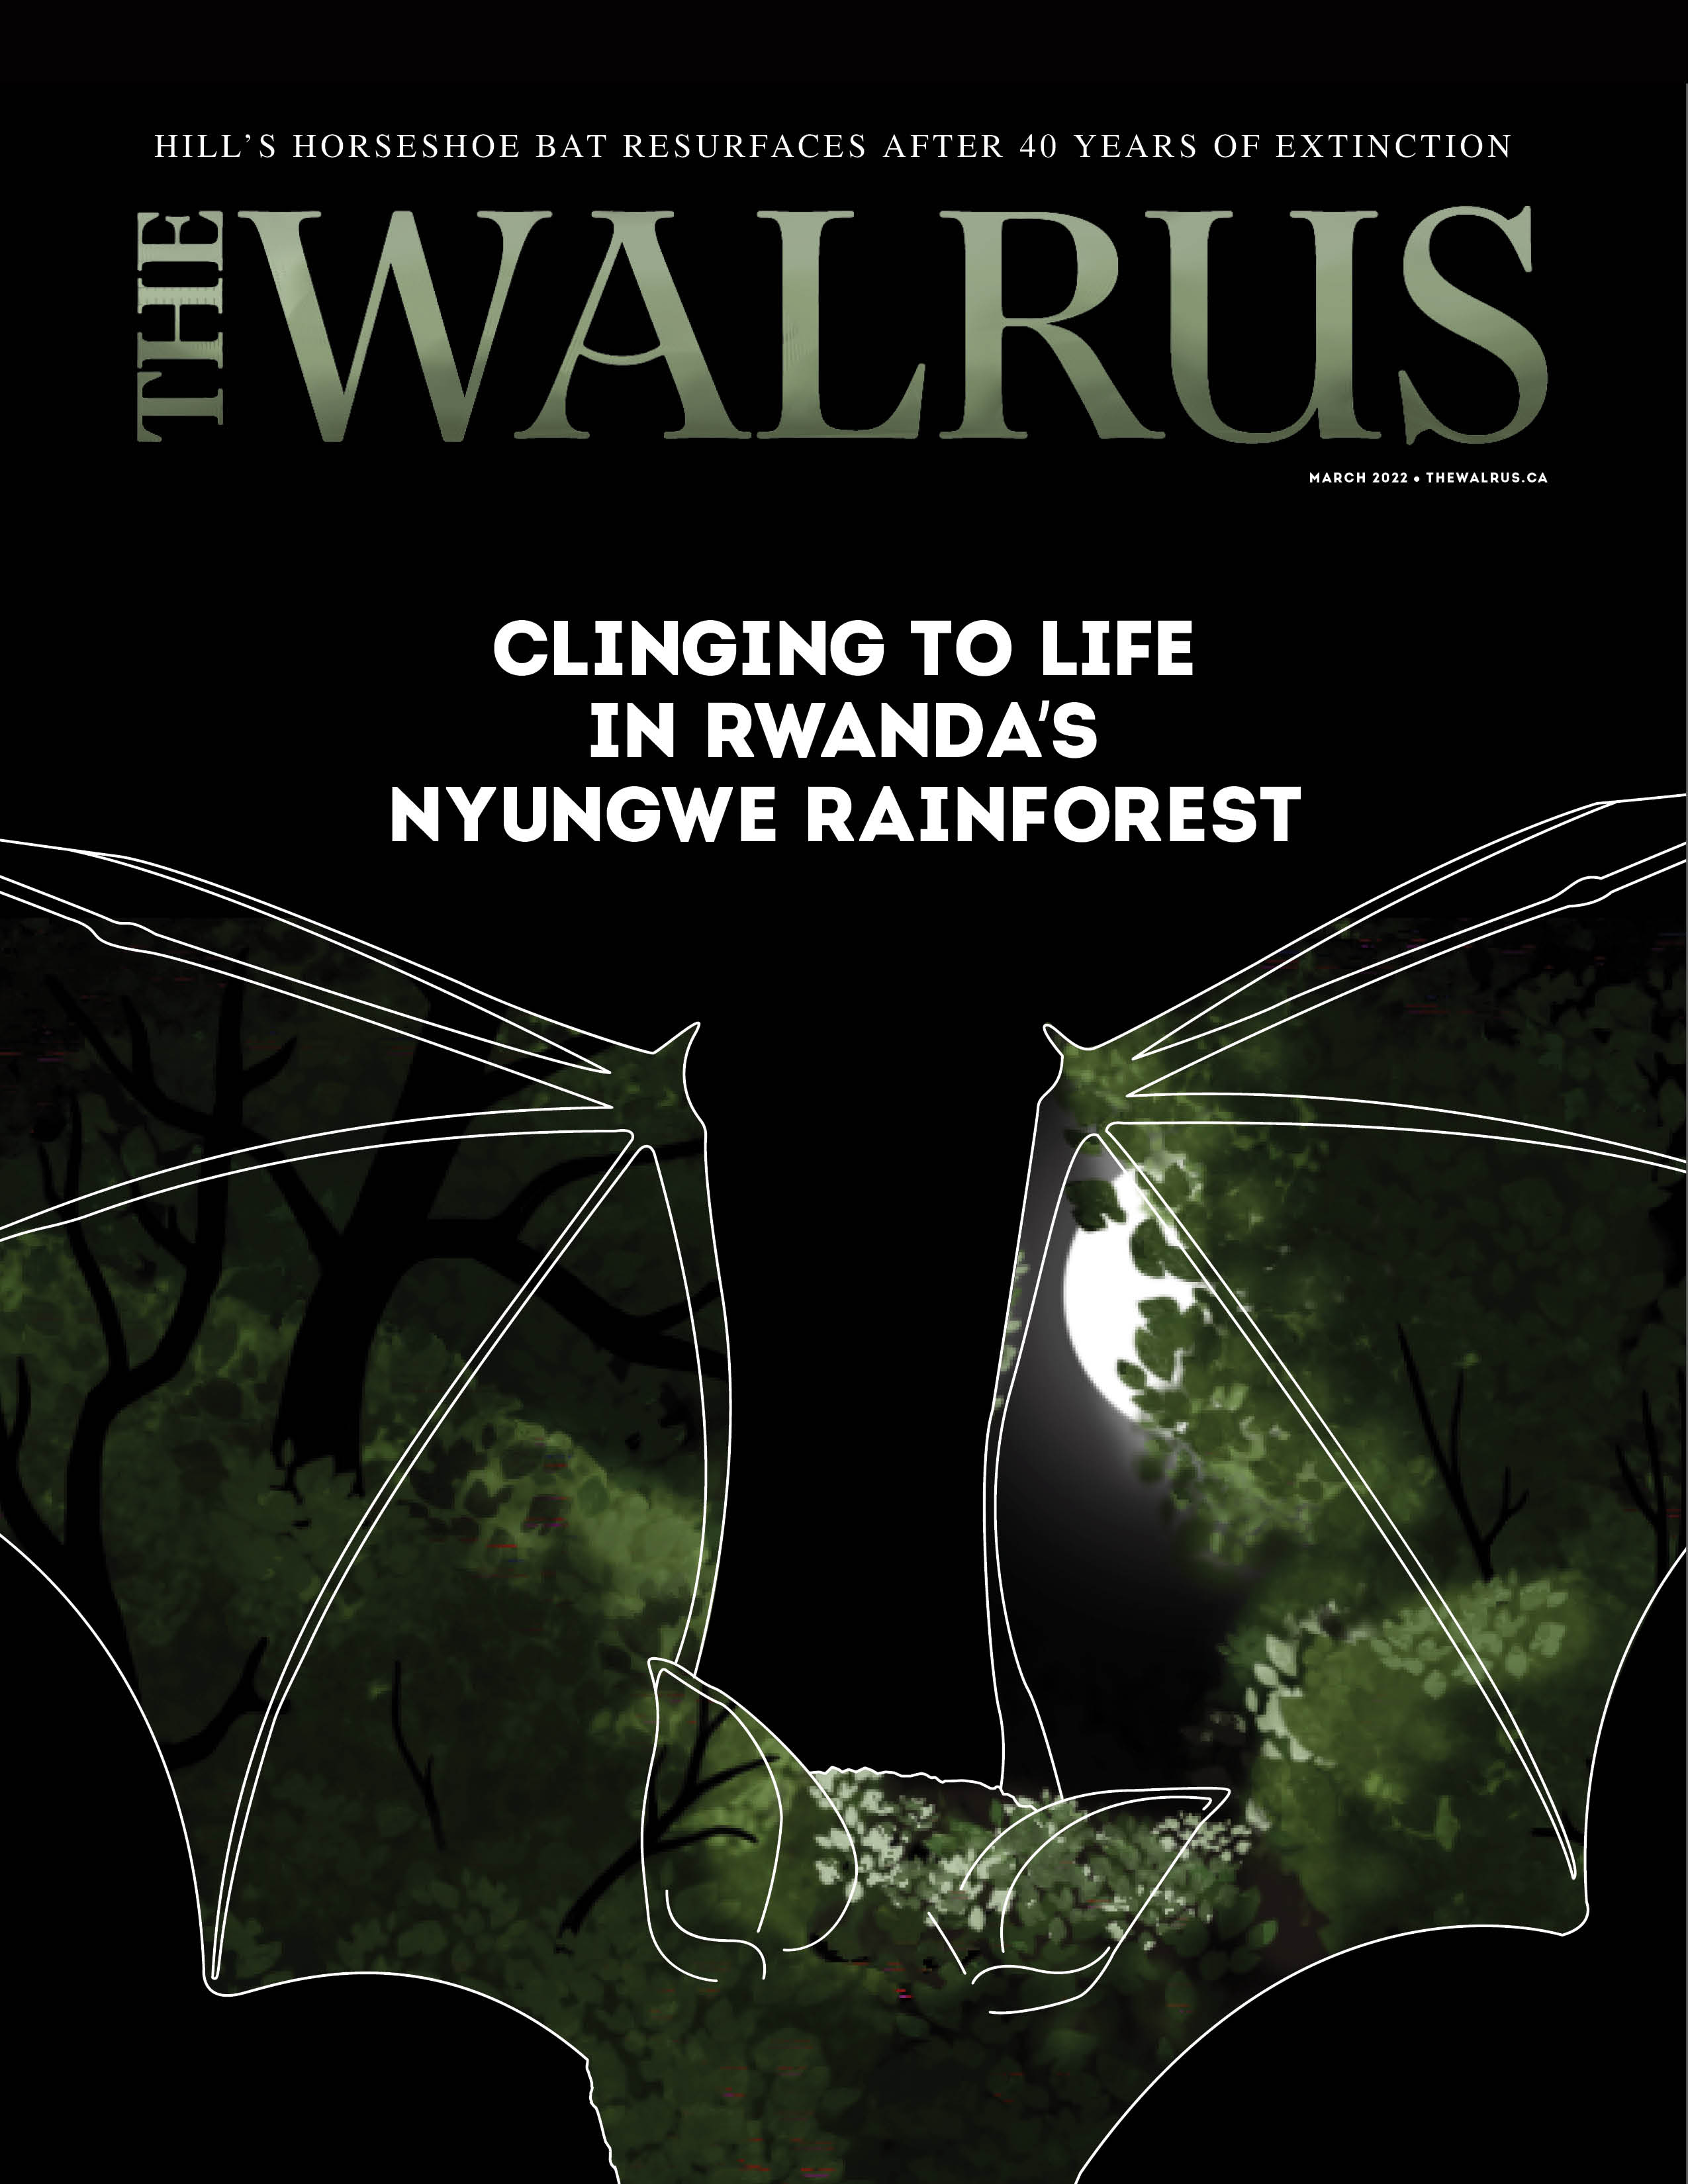 Cover for The Walrus with bat and no text